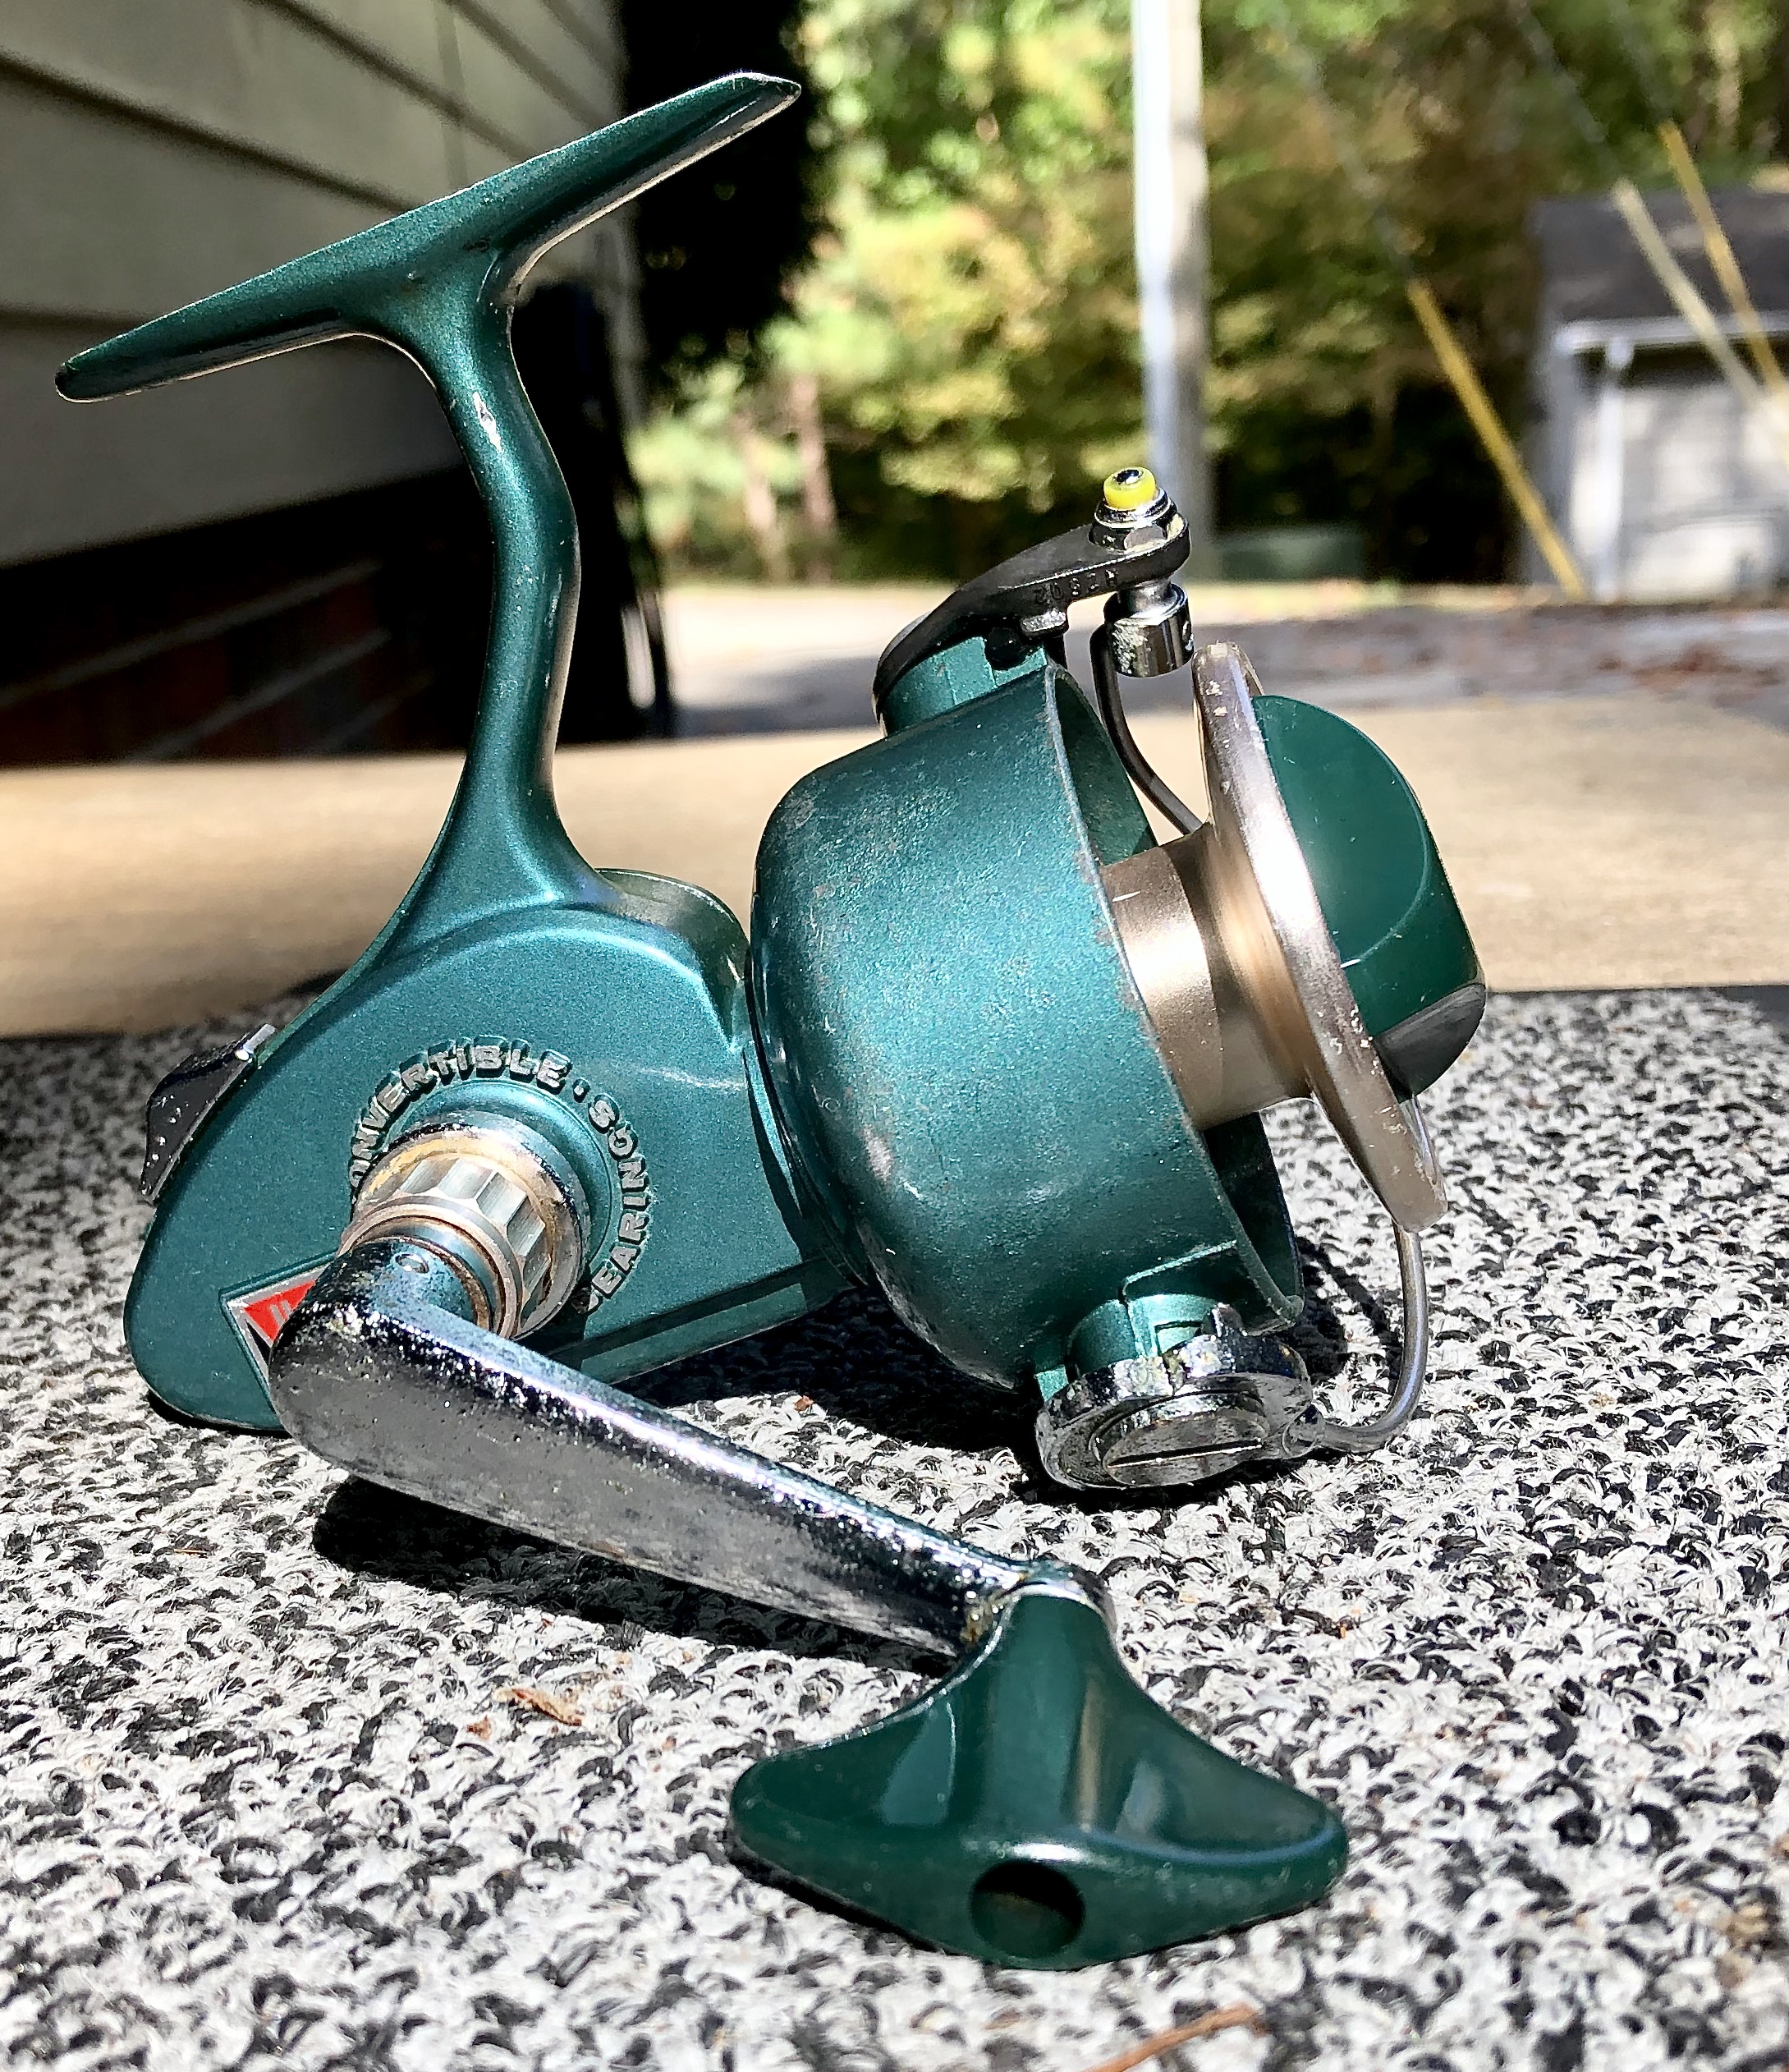 Another Green Reel, Another Spin on Glass